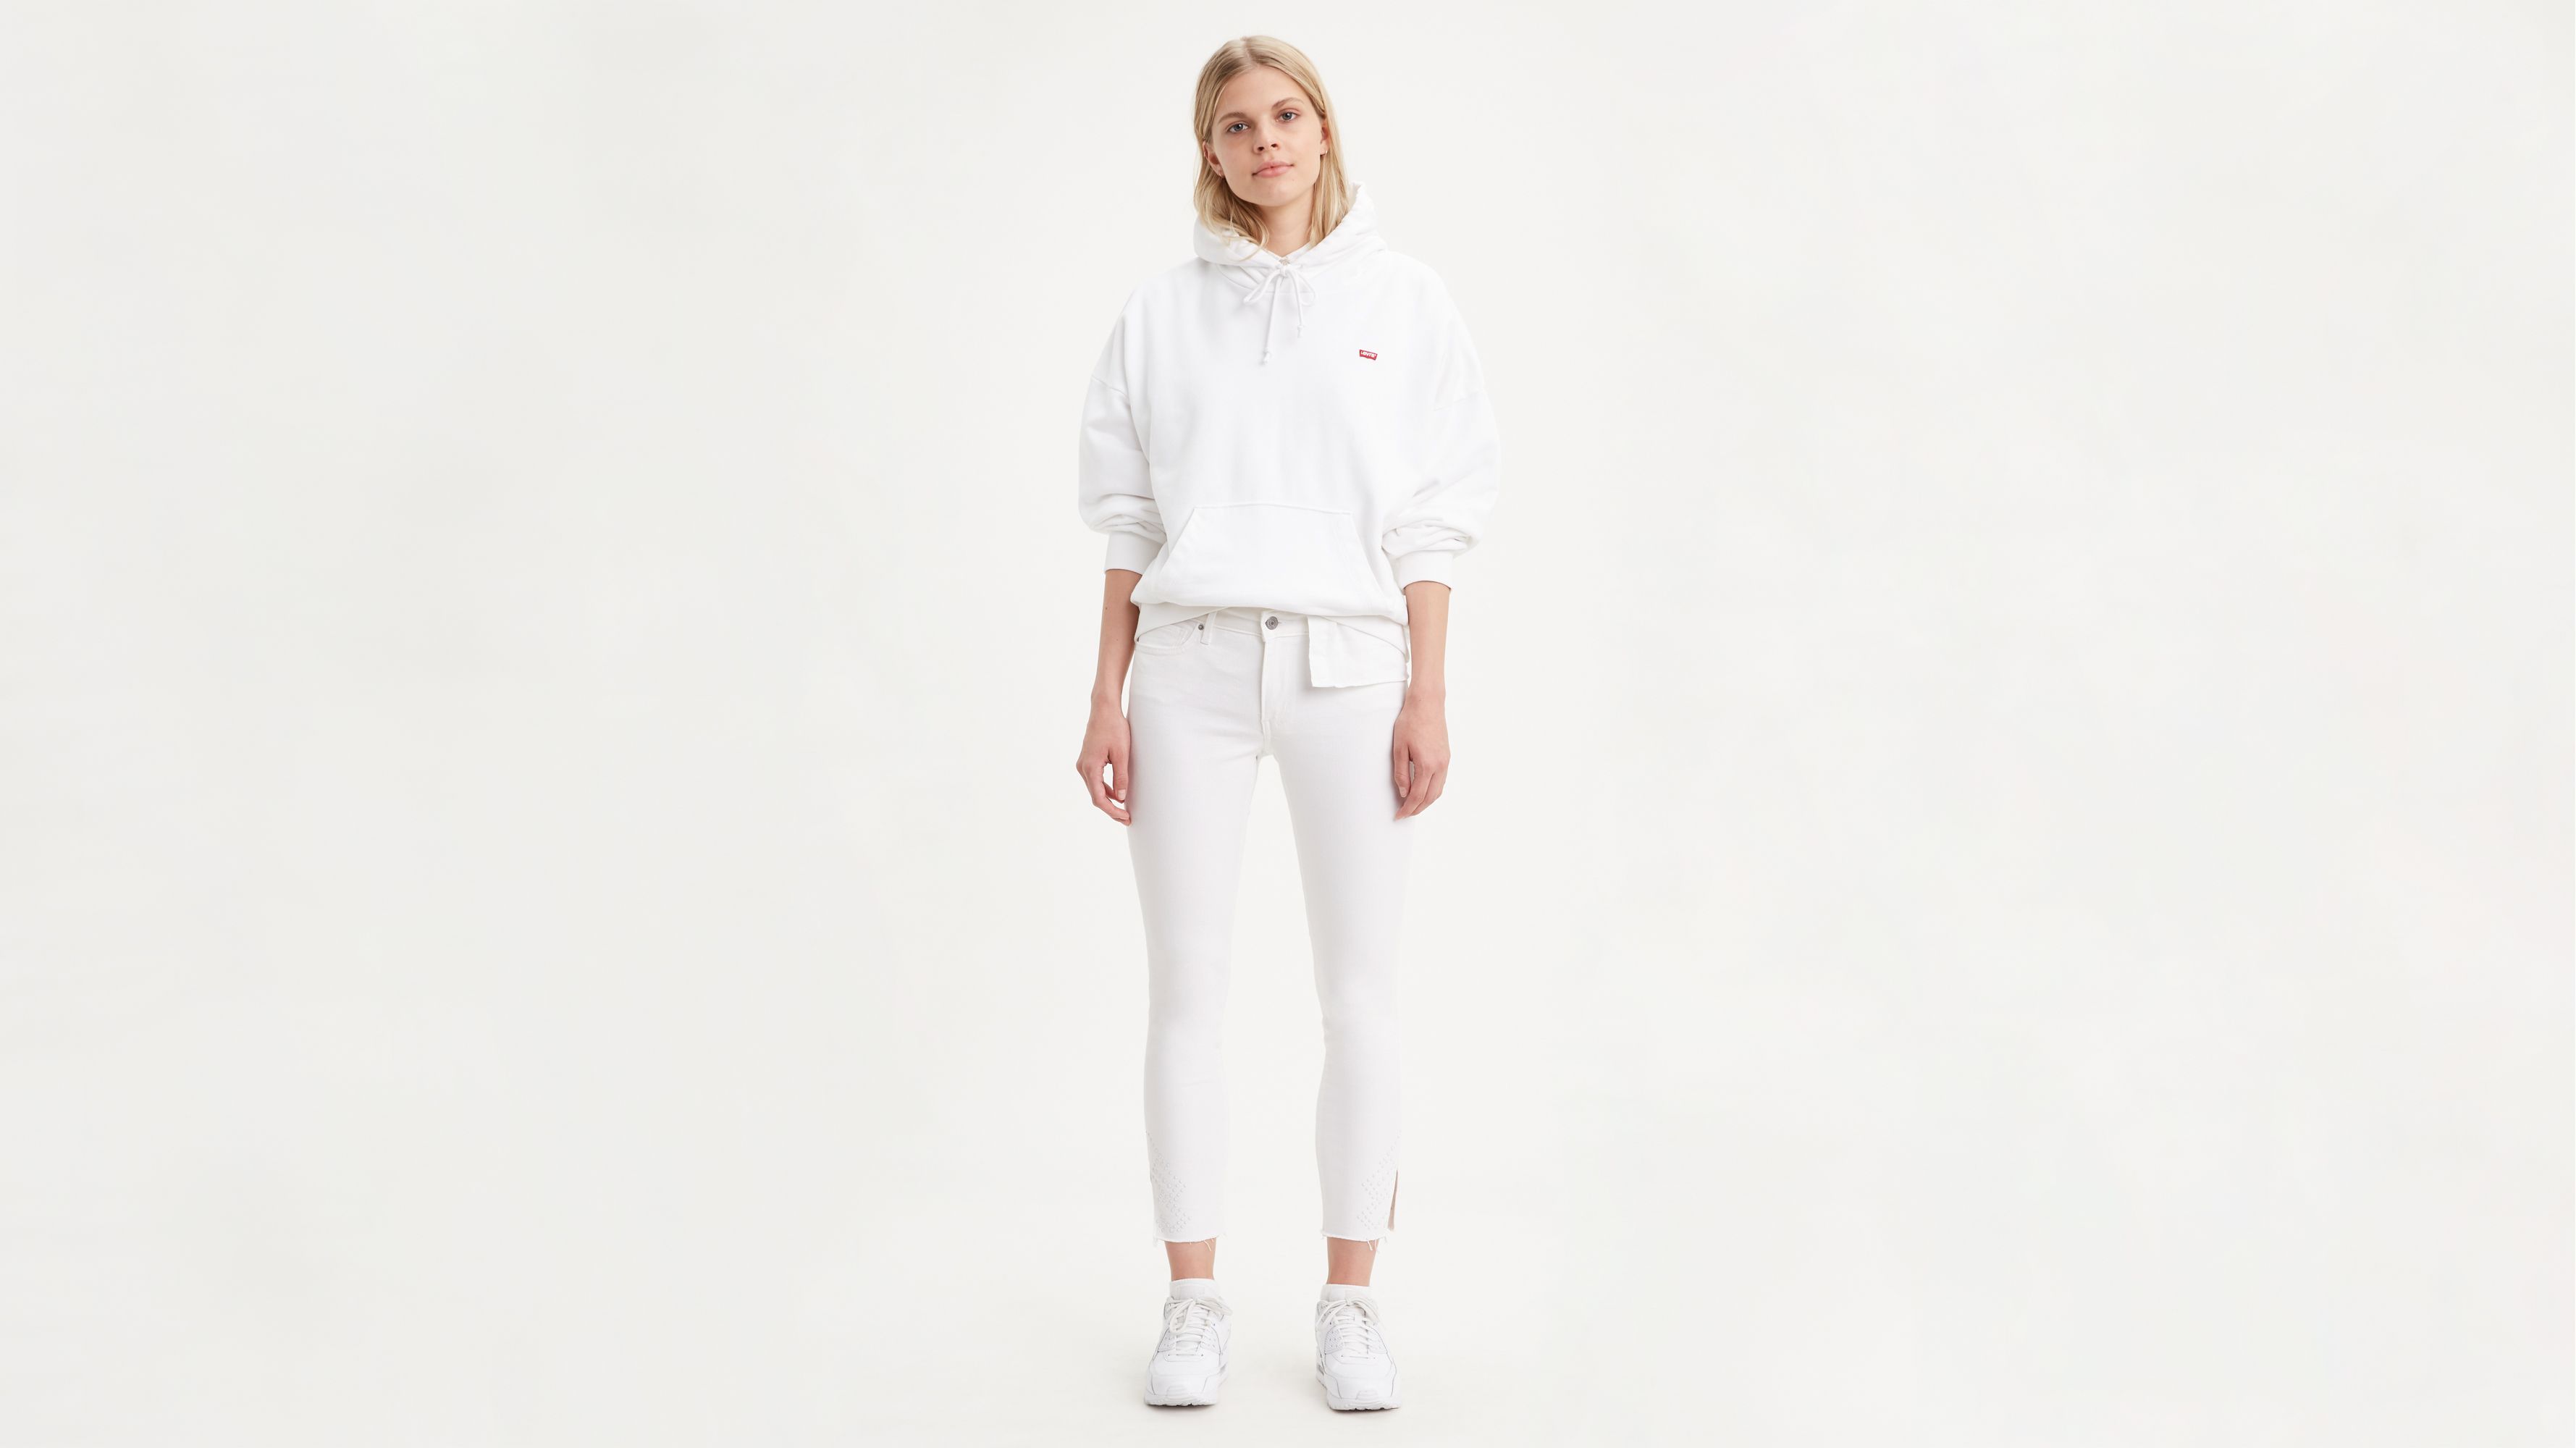 711 Skinny Studded Ankle Women's Jeans - White | Levi's® US